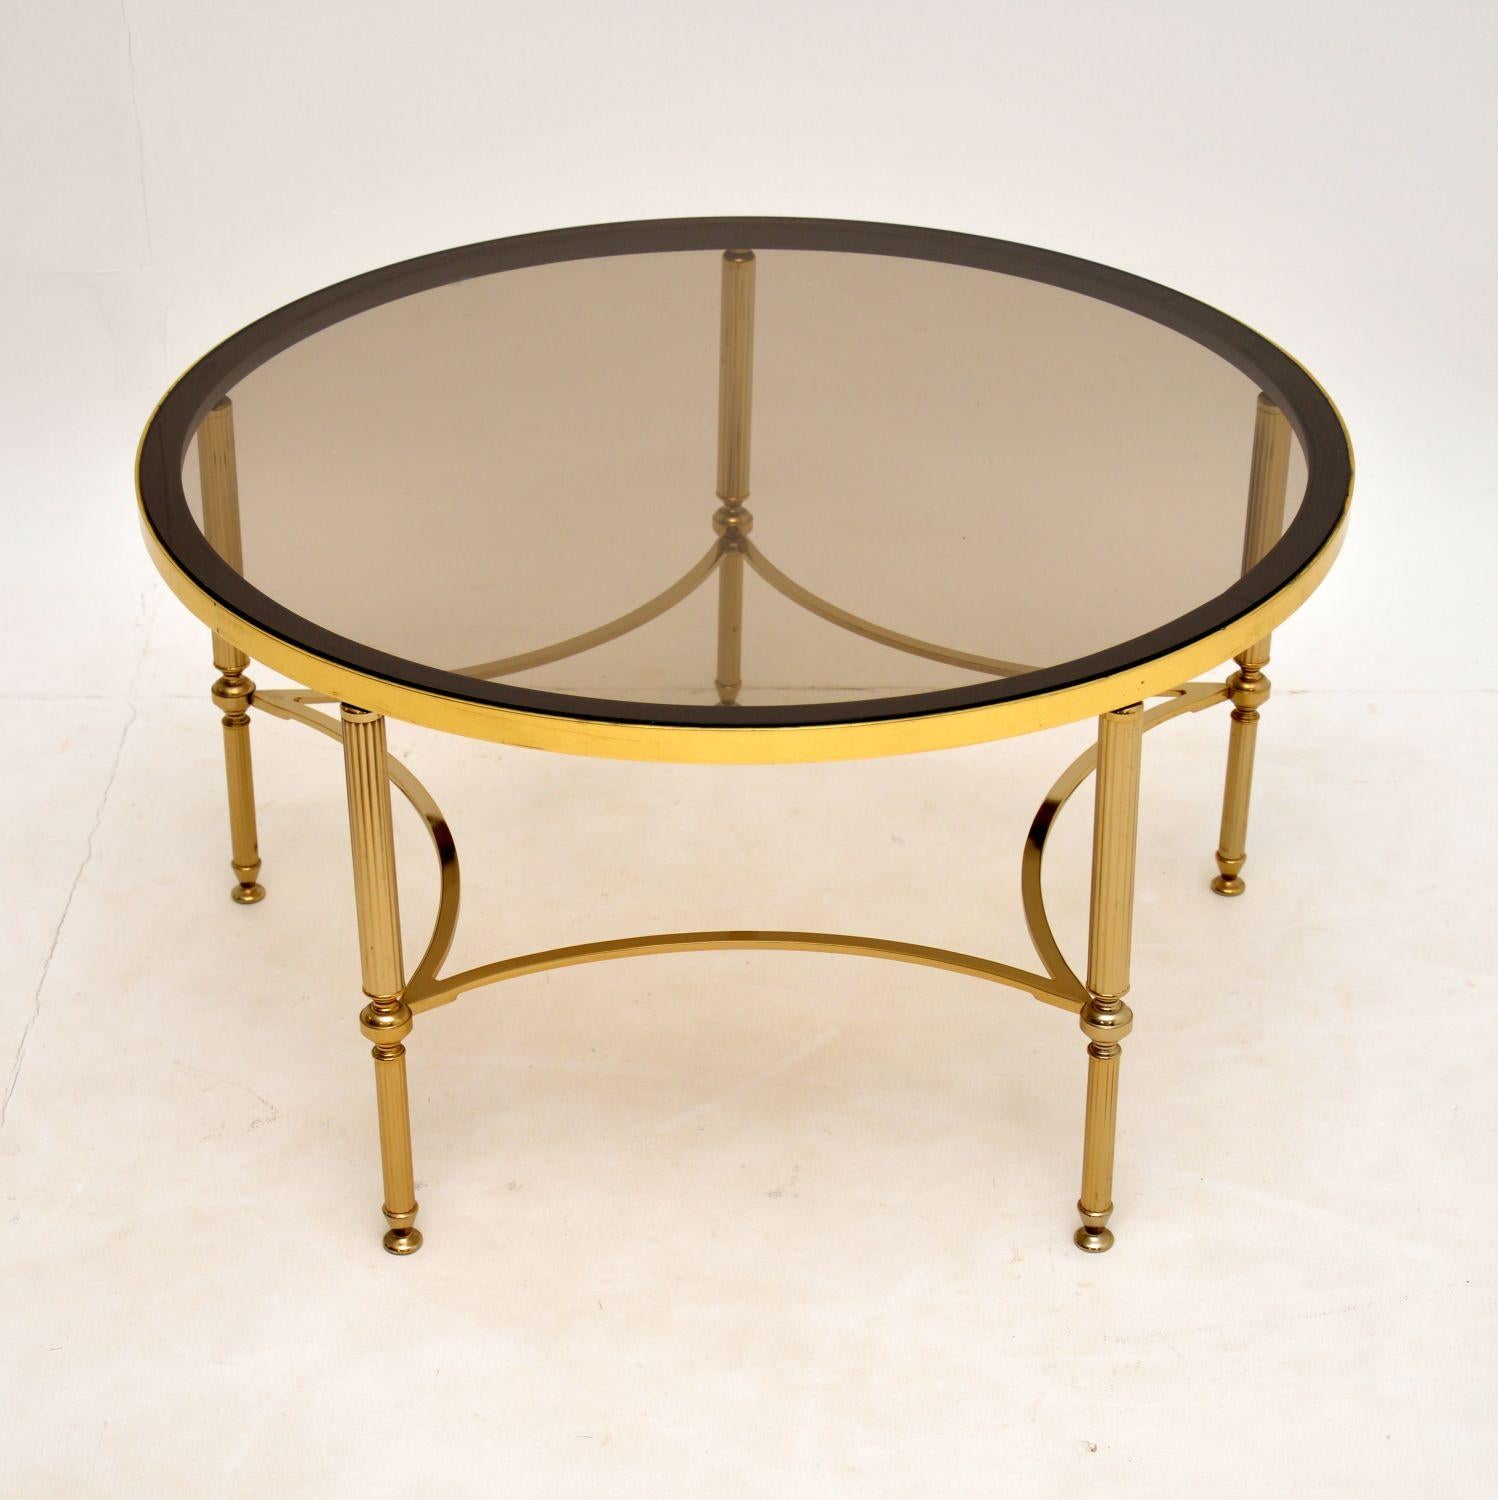 A stunning vintage brass coffee table in solid brass. This was made in France, it dates from the 1960-70’s.

The condition is excellent for its age, the brass has been regularly cleaned over the years, and retains a beautiful shine and colour. The